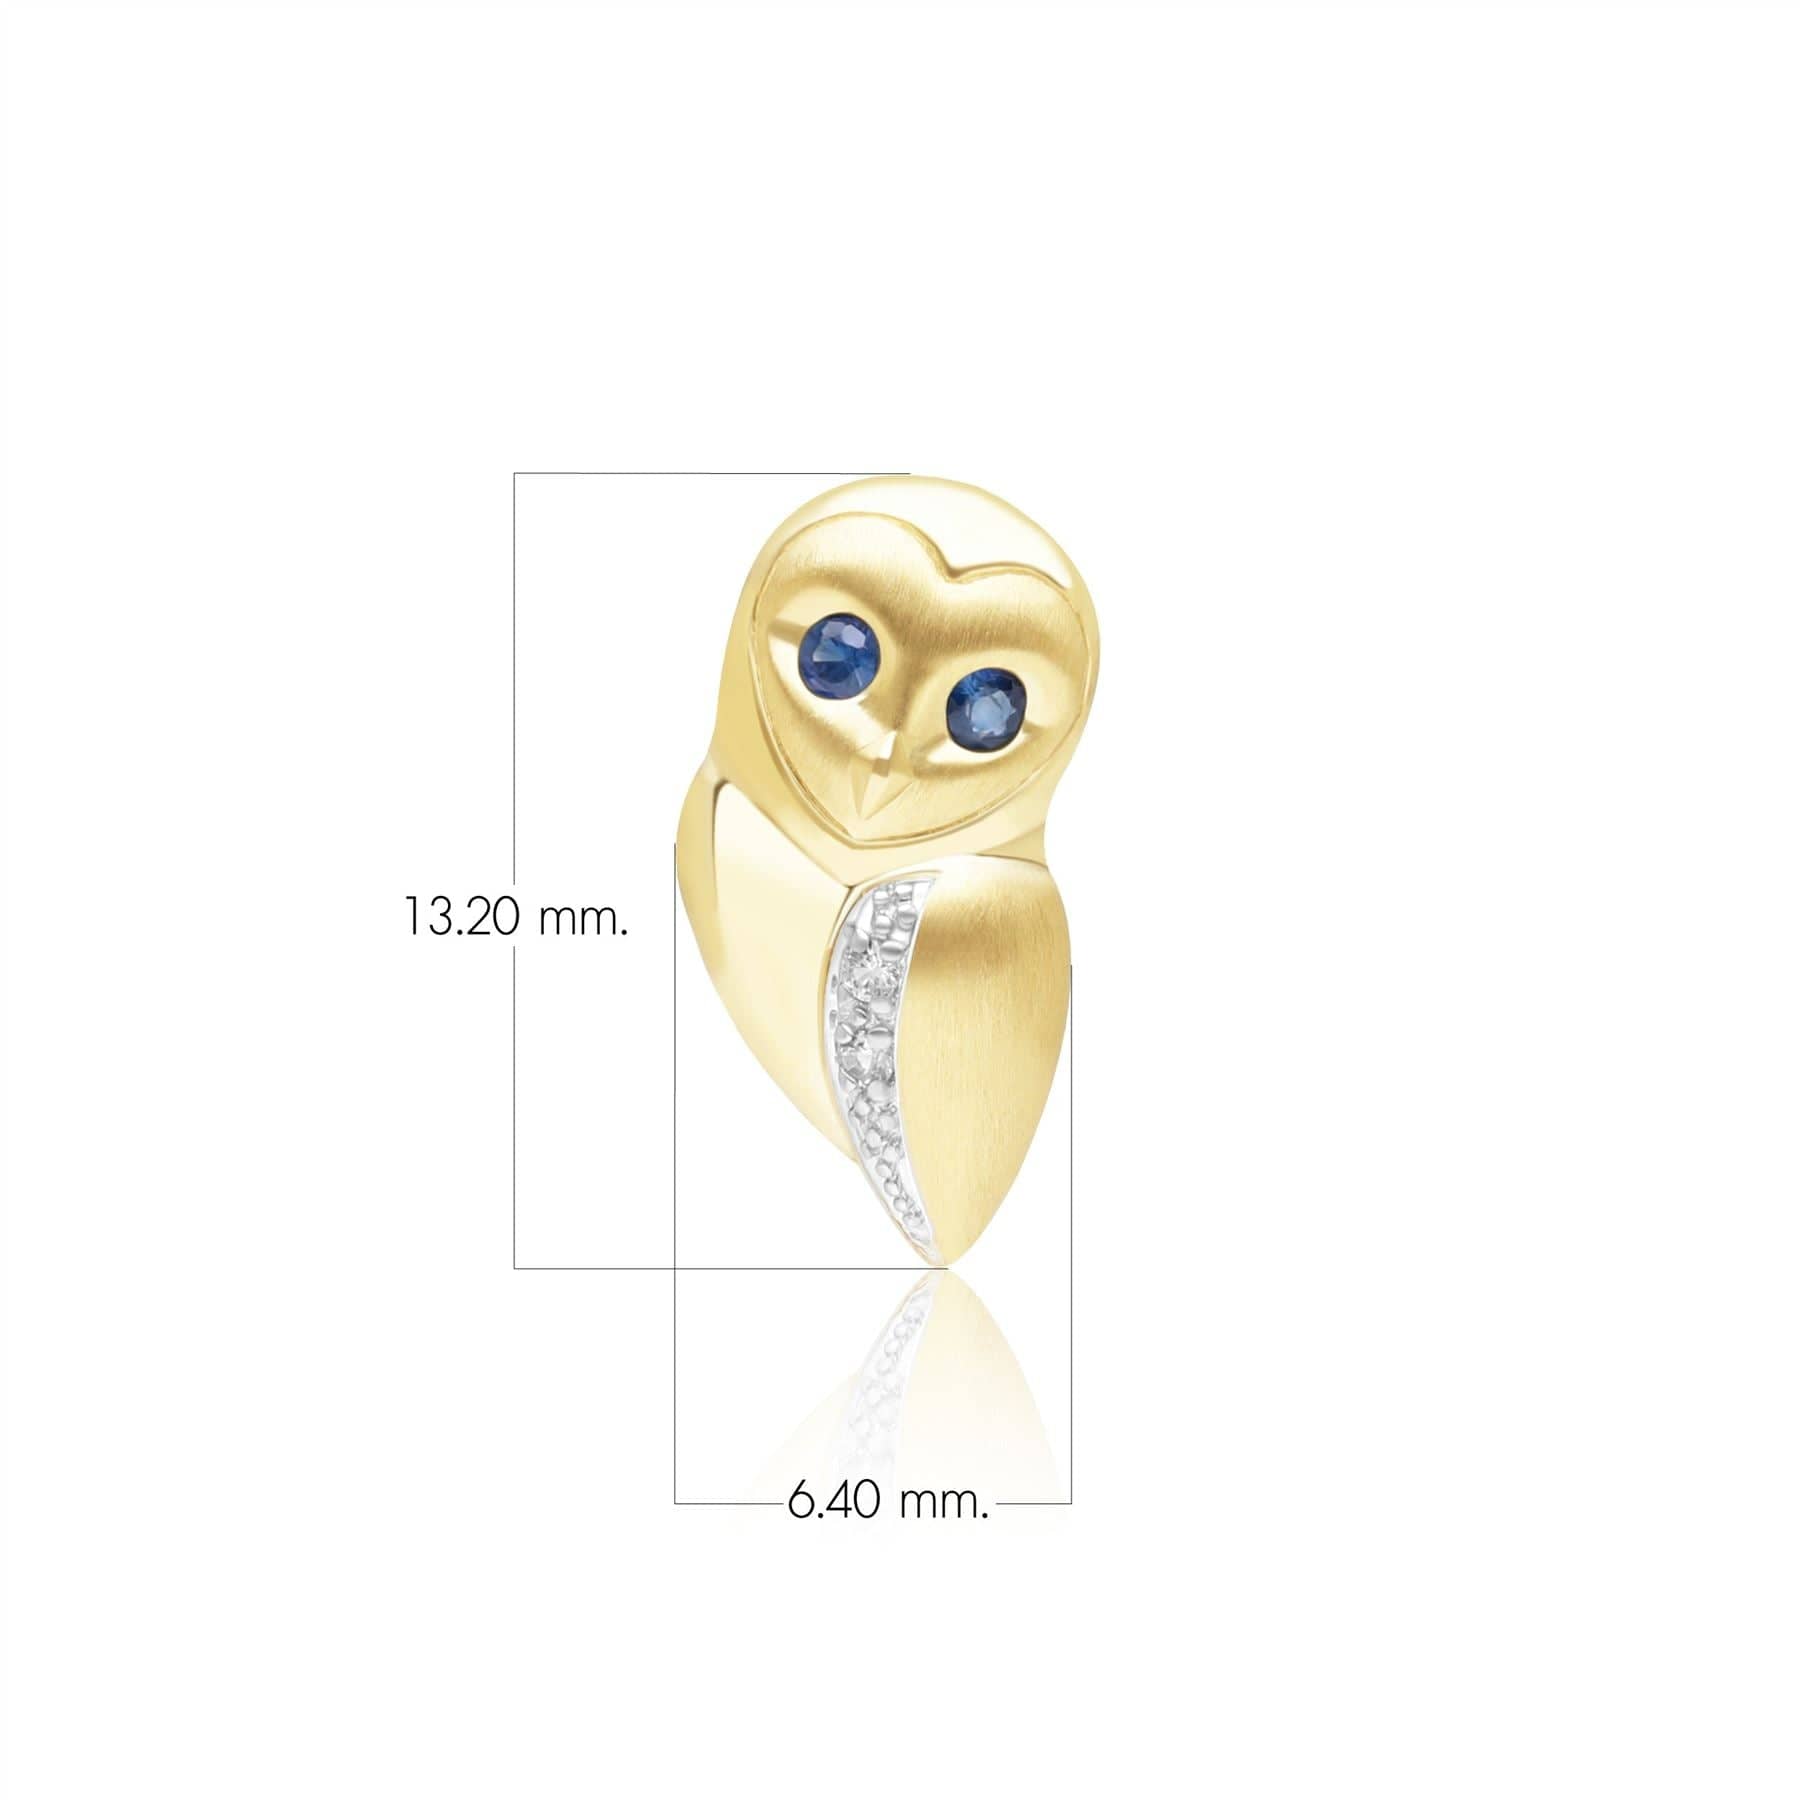 135T0004039 Gardenia Sapphire and White Sapphire Owl Pin in 9ct Yellow Gold Dimensions